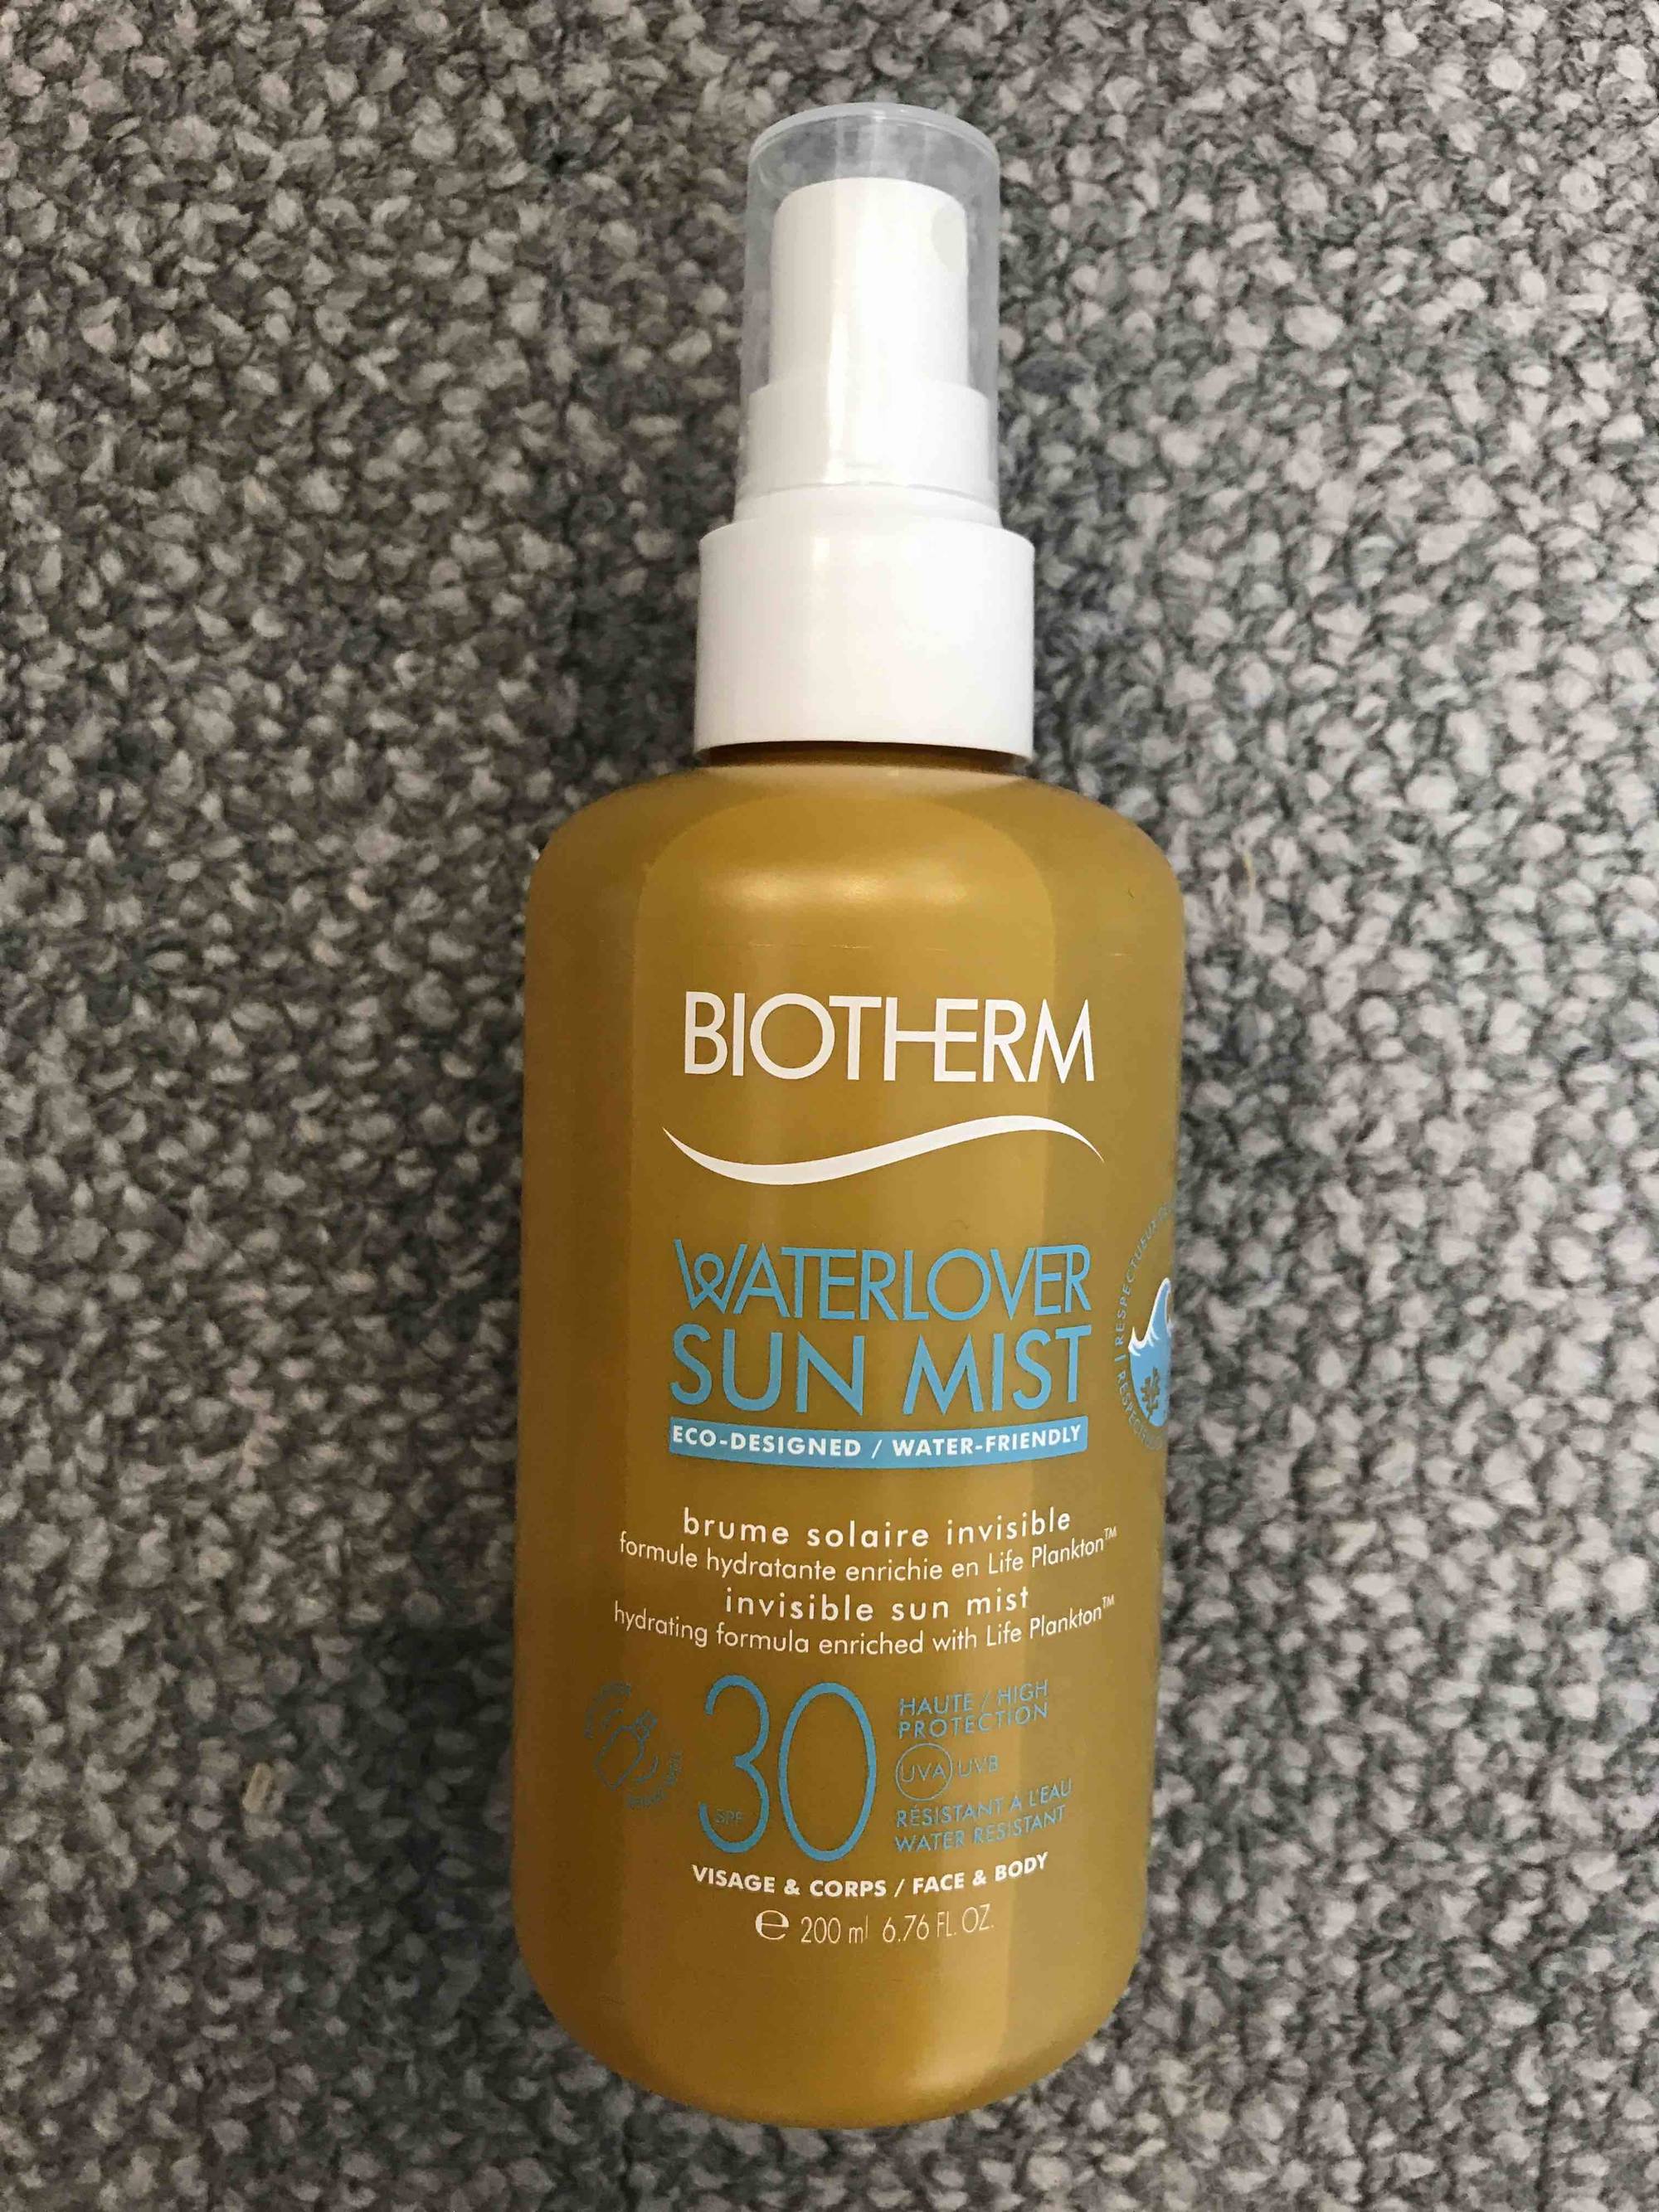 BIOTHERM - Waterlover sun mist - Brume solaire invisible SPF 30